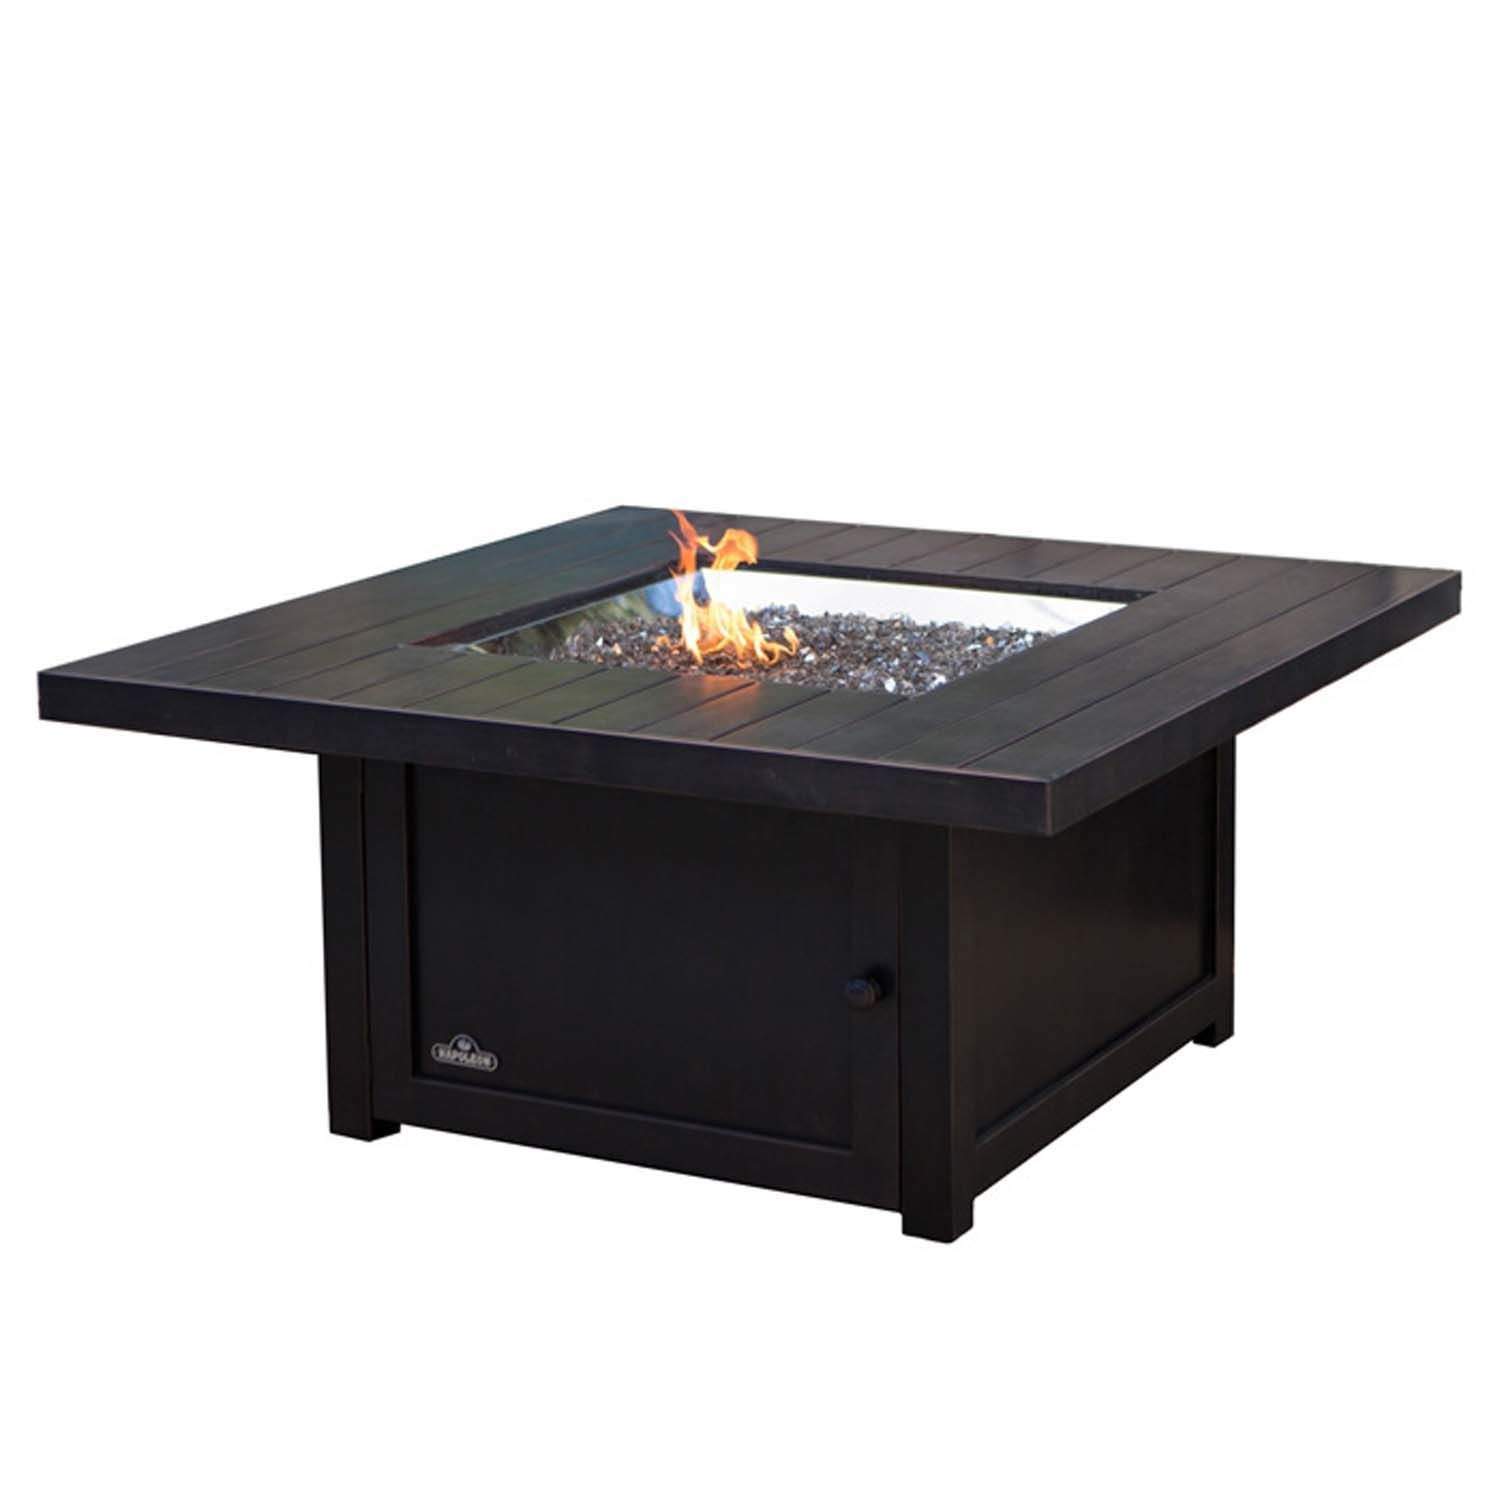 Outdoor Fire Pit, Global Warmer Fire Pit